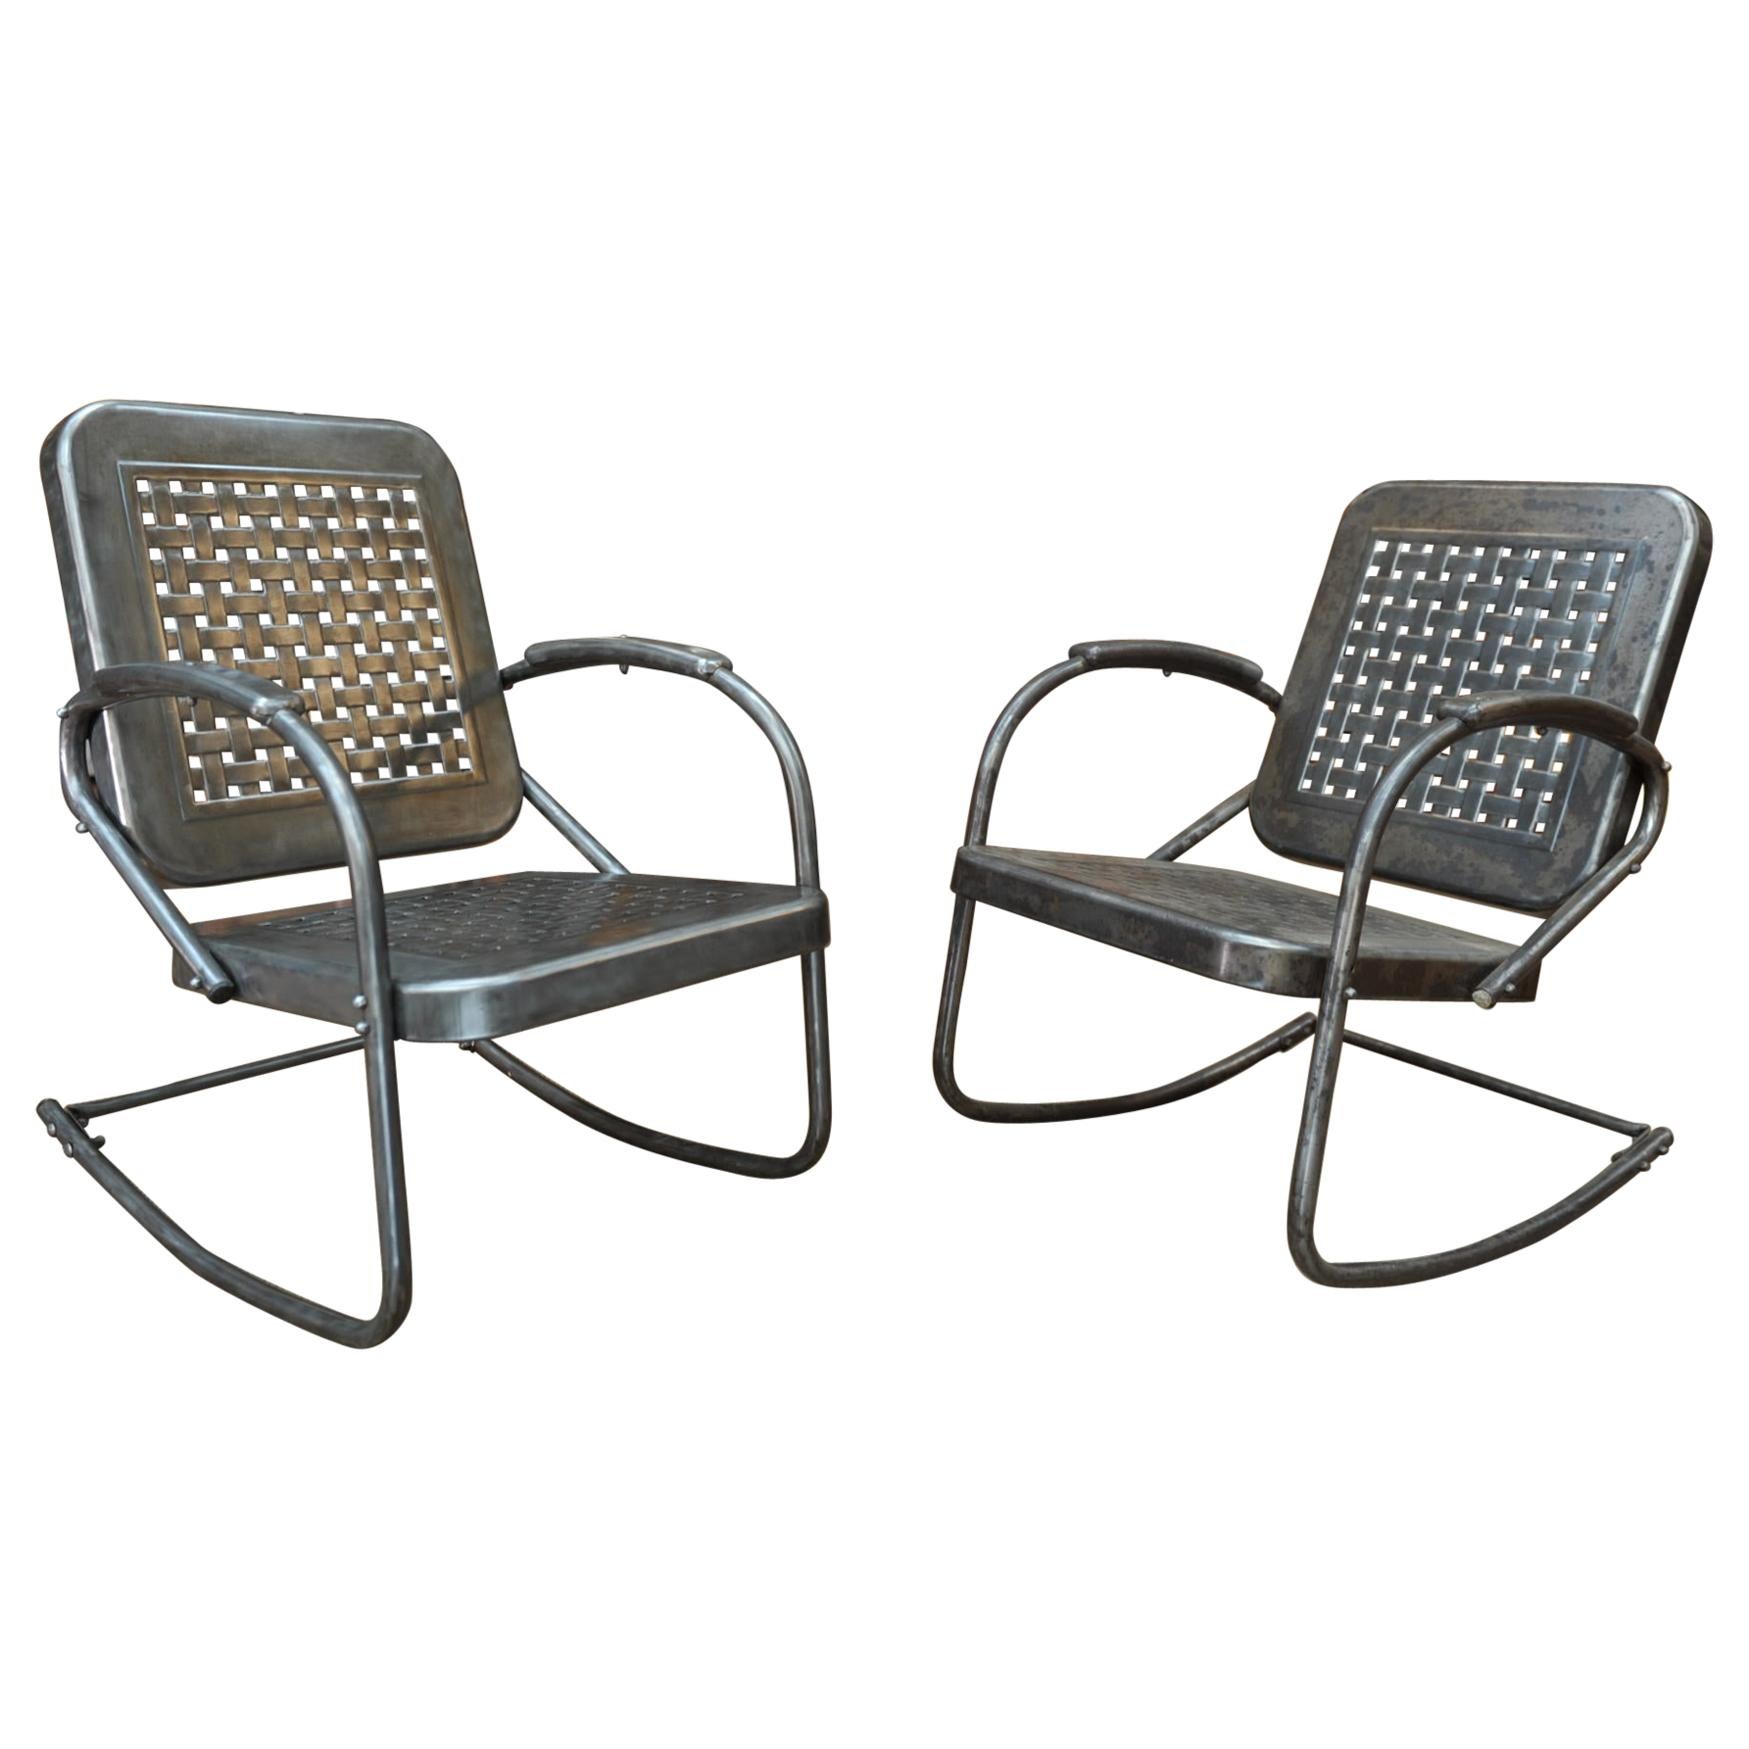 Pair of Perforated Metal Armchairs, circa 1950 For Sale